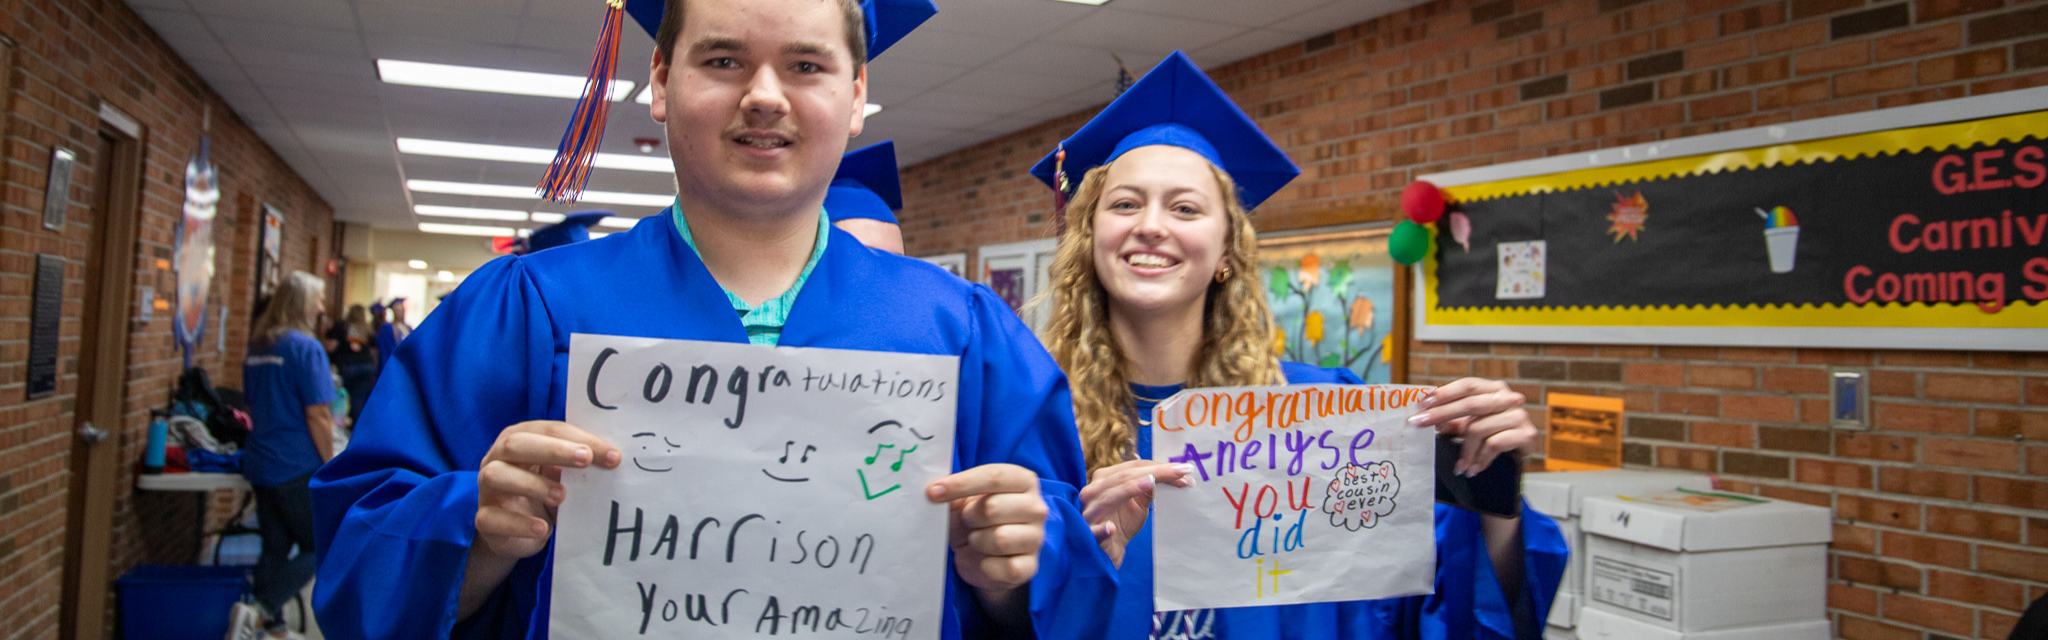 image of students in cap and gown holding signs